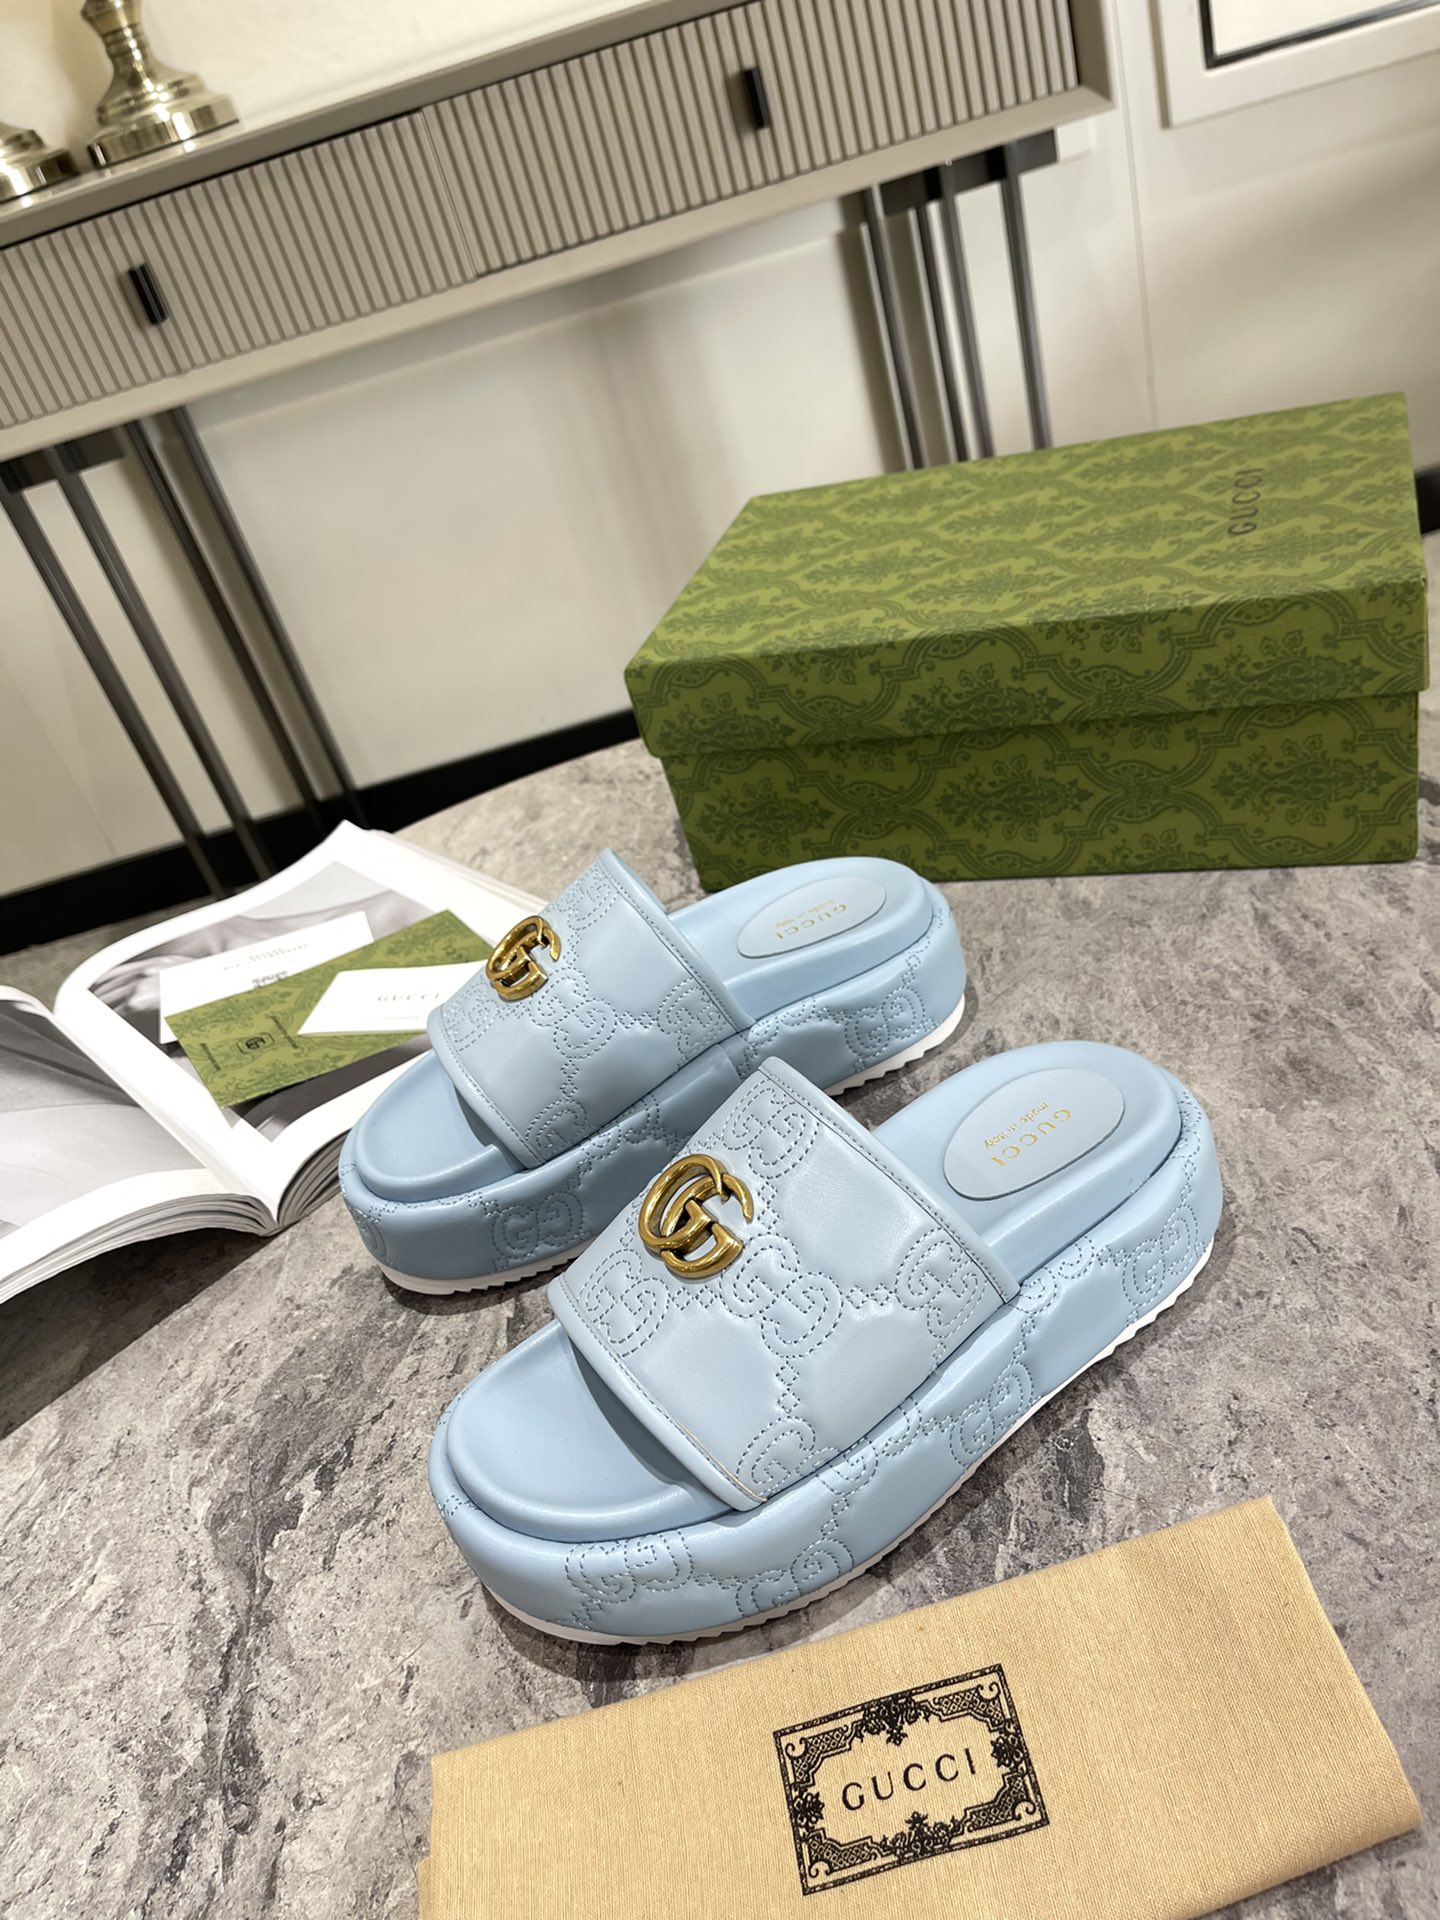 Gucci Quilted embroidered faux leather platform slides For Women # 264892, cheap Gucci Slippers, only $68!